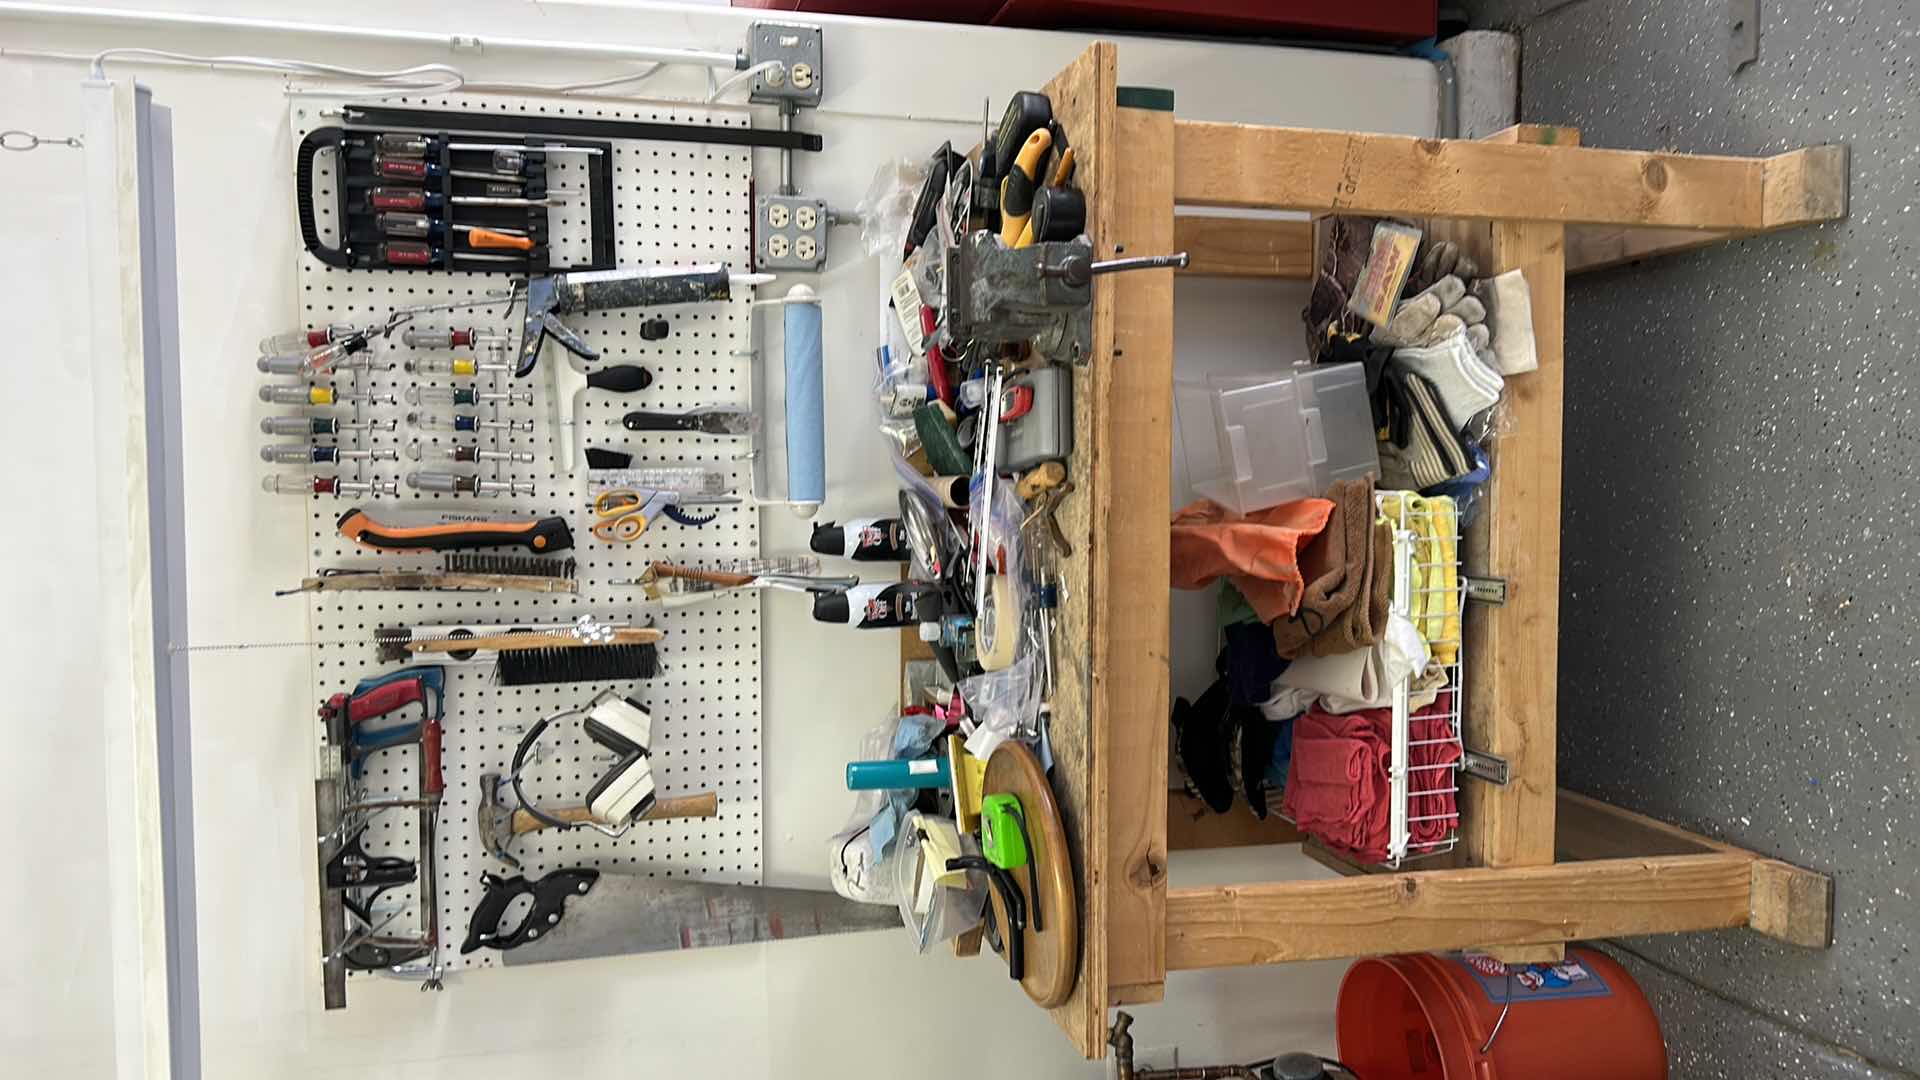 Photo 1 of CONTENTS SIDE WALL IN GARAGE, INCLUDES WORK BENCH, AND ALL TOOLS ON BENCH, PEG BOARD AND HANGING LIGHT FIXTURE 43” x 25.5” x H38”